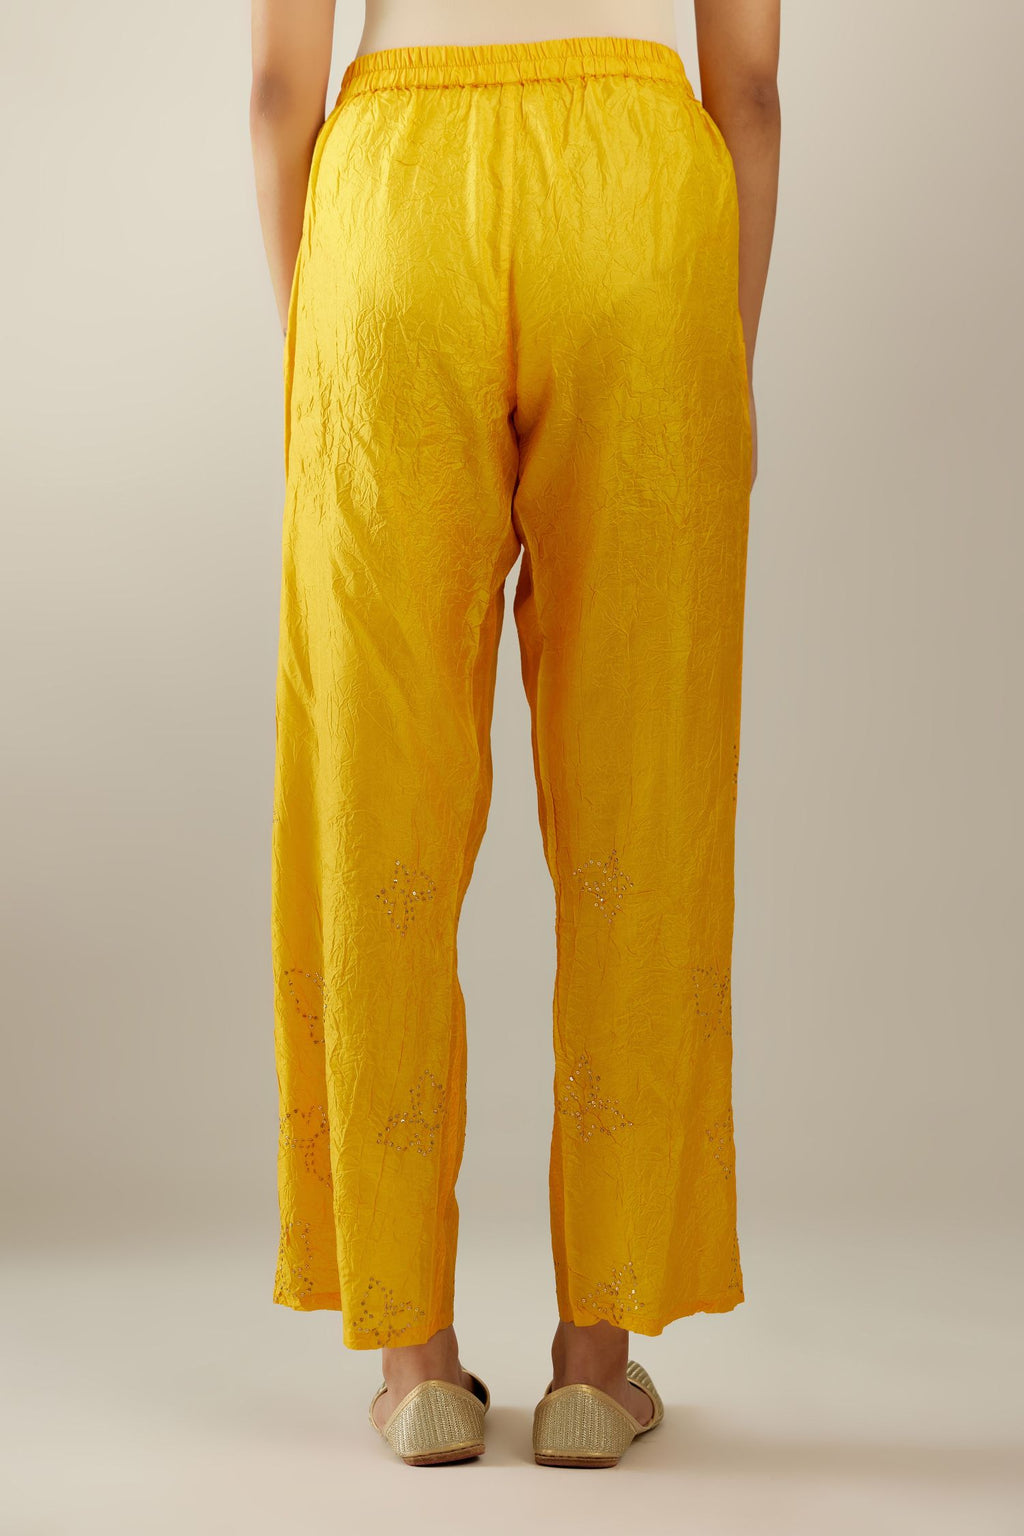 Deep yellow crushed silk pants with side pockets and assorted sequined butterflies till mid-calf length.